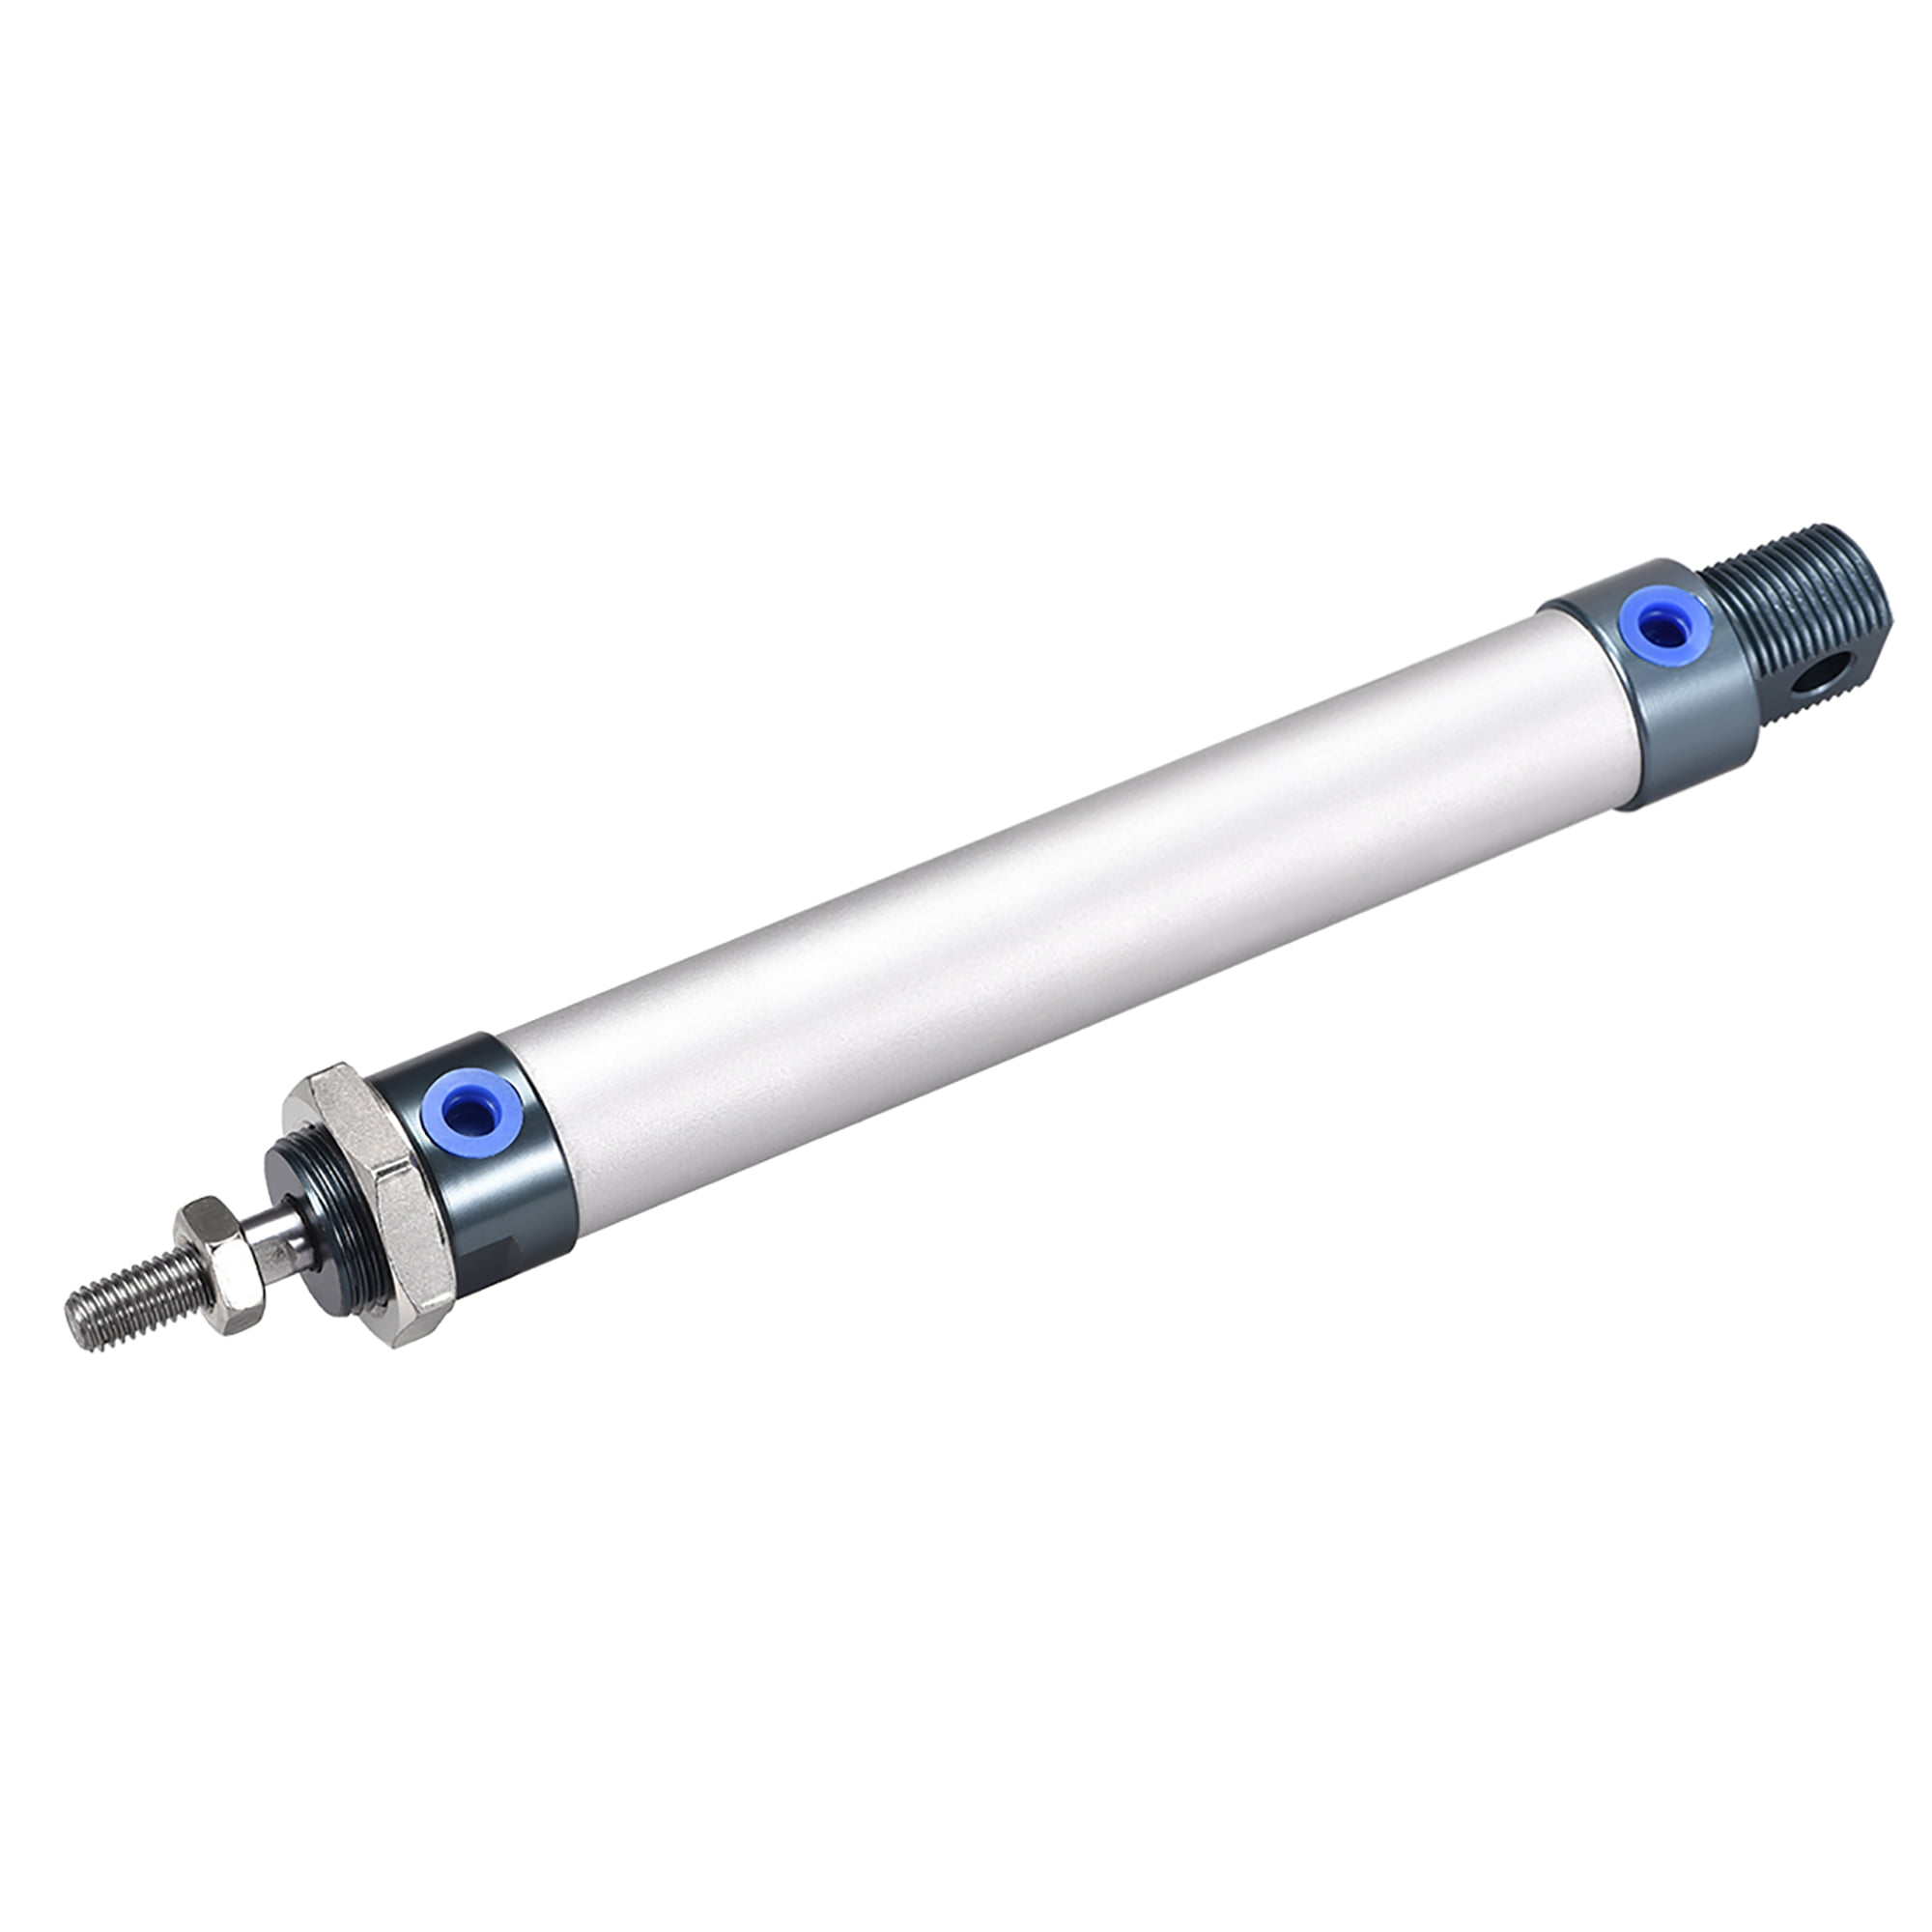 uxcell Pneumatic Air Cylinder MAL20 X 200,20mm Bore 200mm Stoke 1/8PT,Single Rod Double Action 